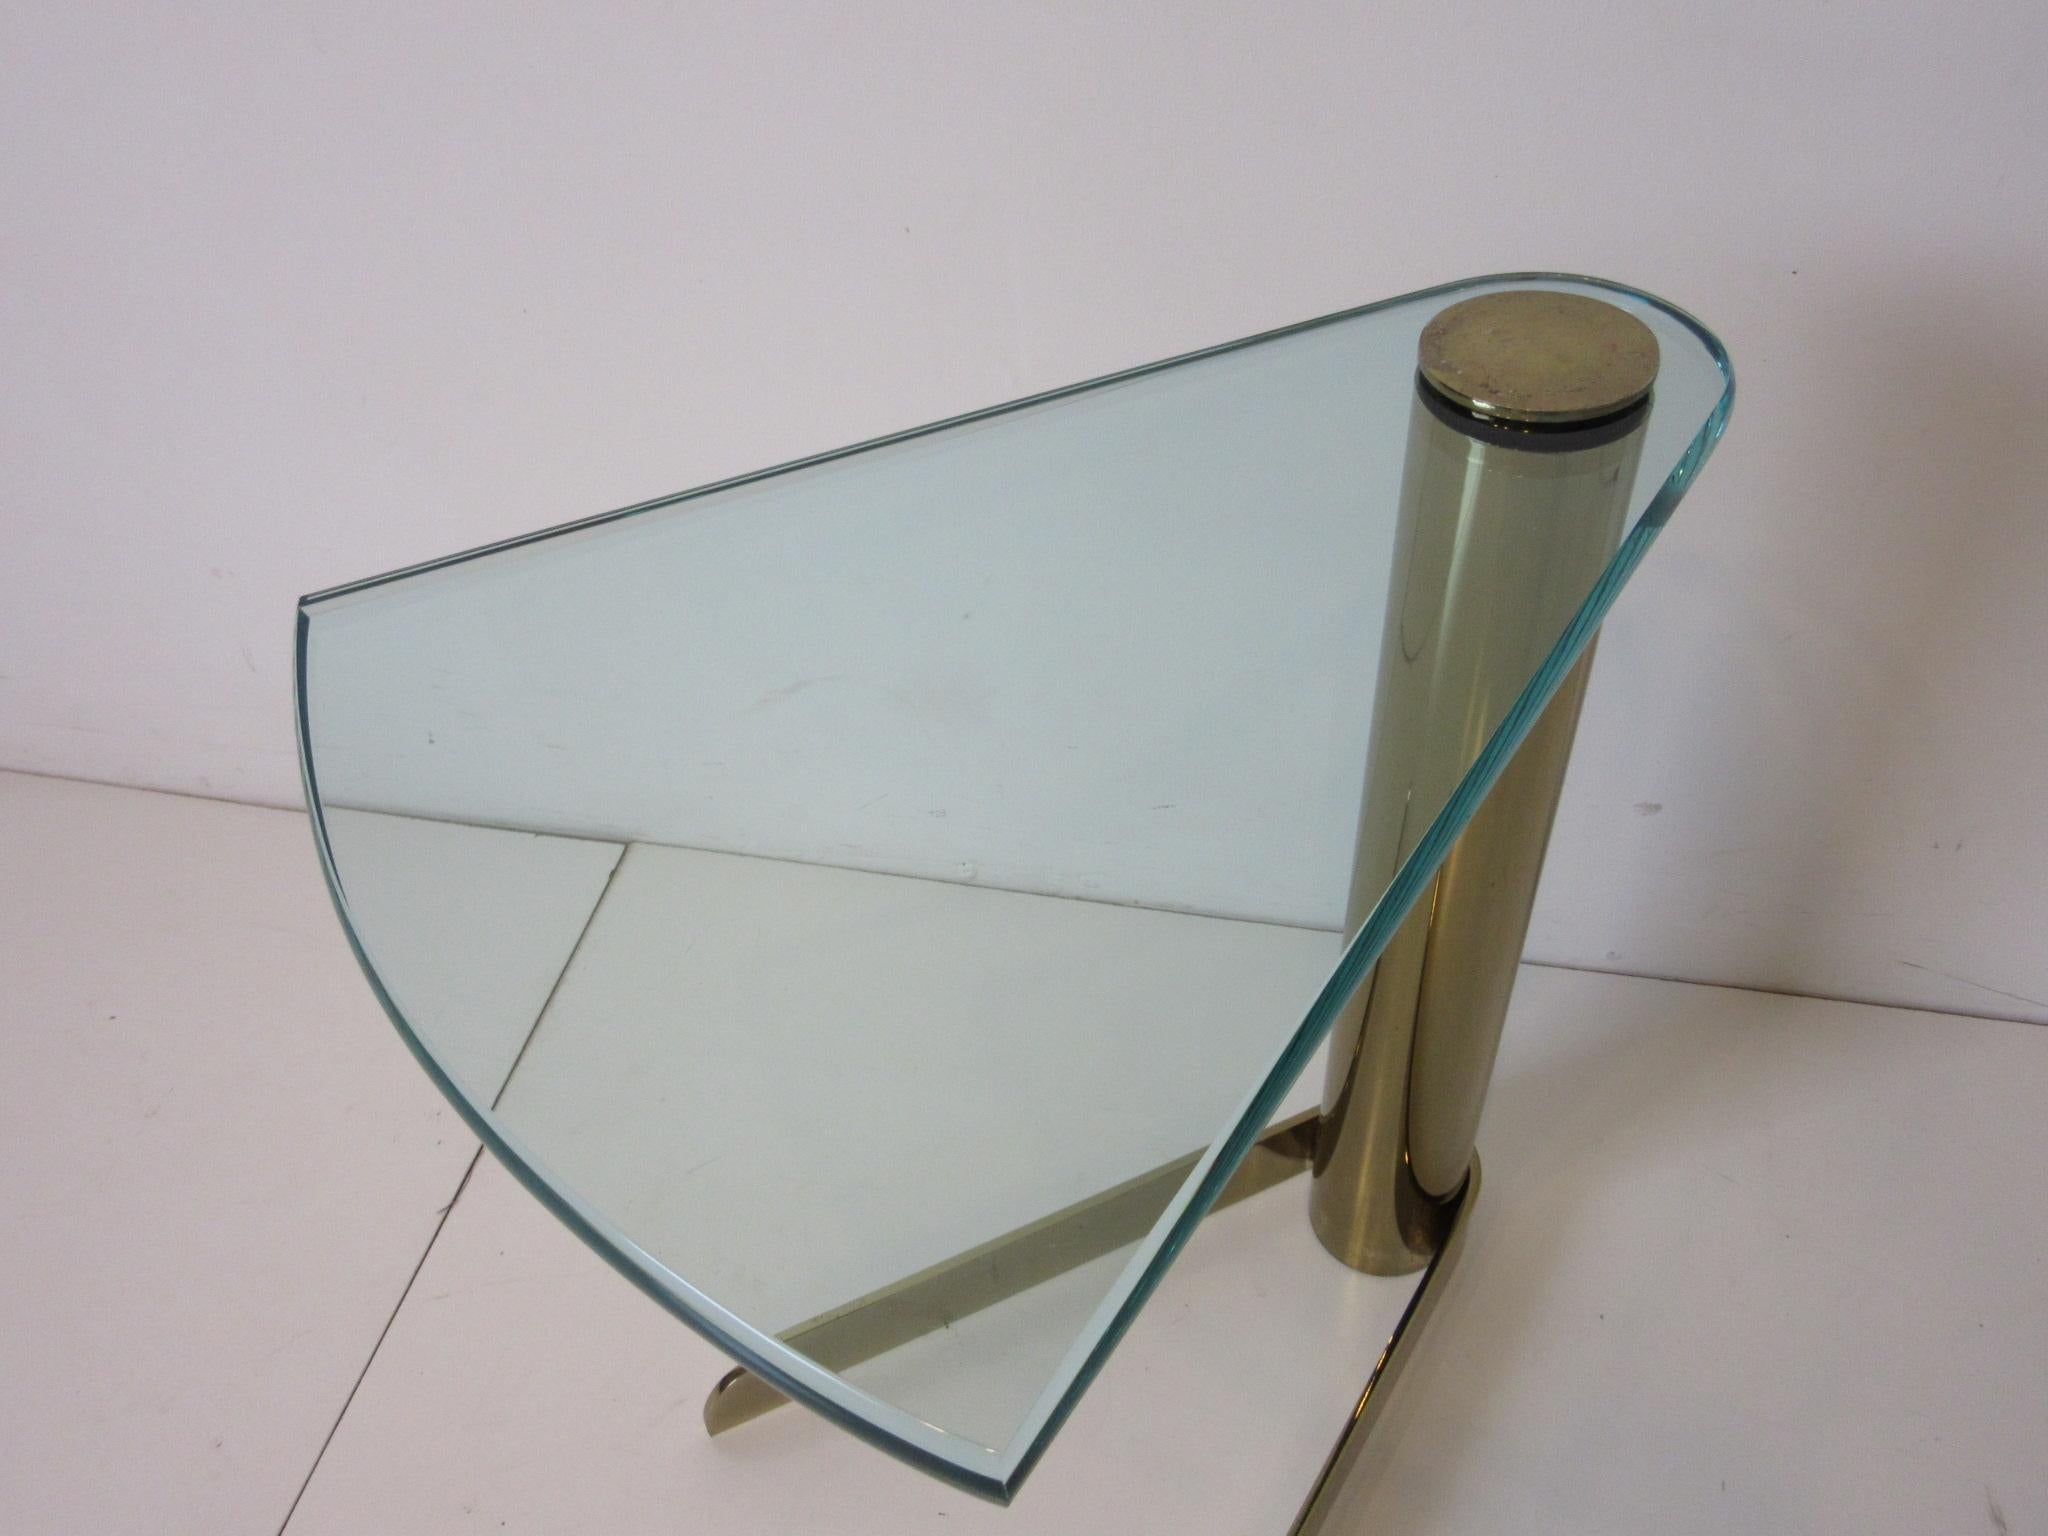 Wedge Brass / Glass Side Table from the Leon Pace Collection 2